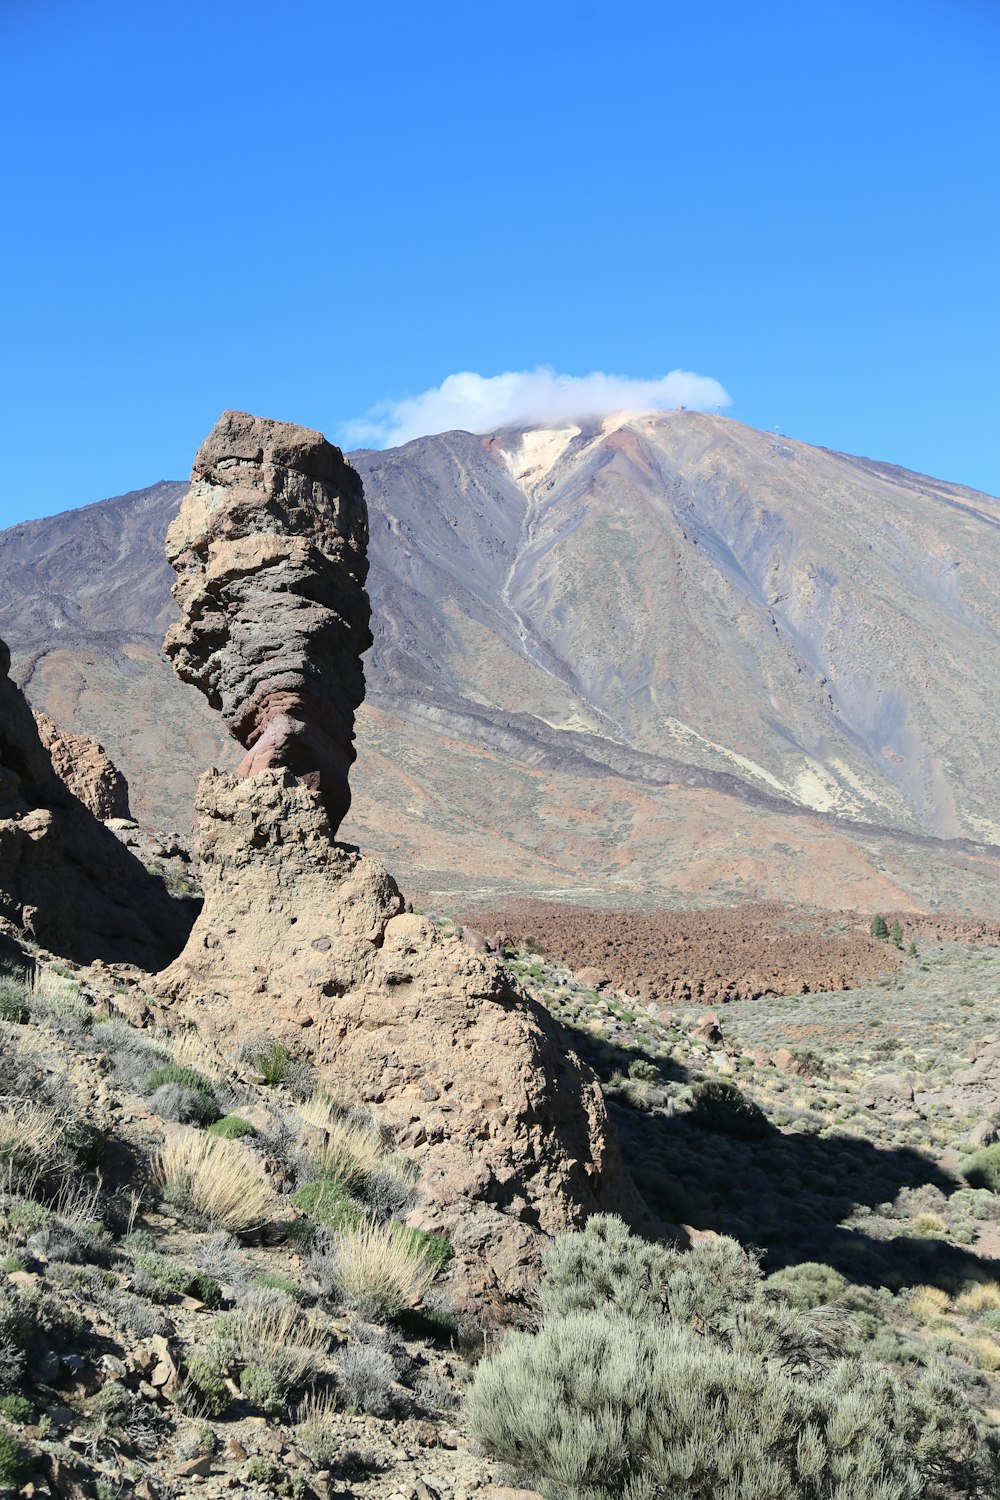 a rock formation in the desert with a mountain in the background